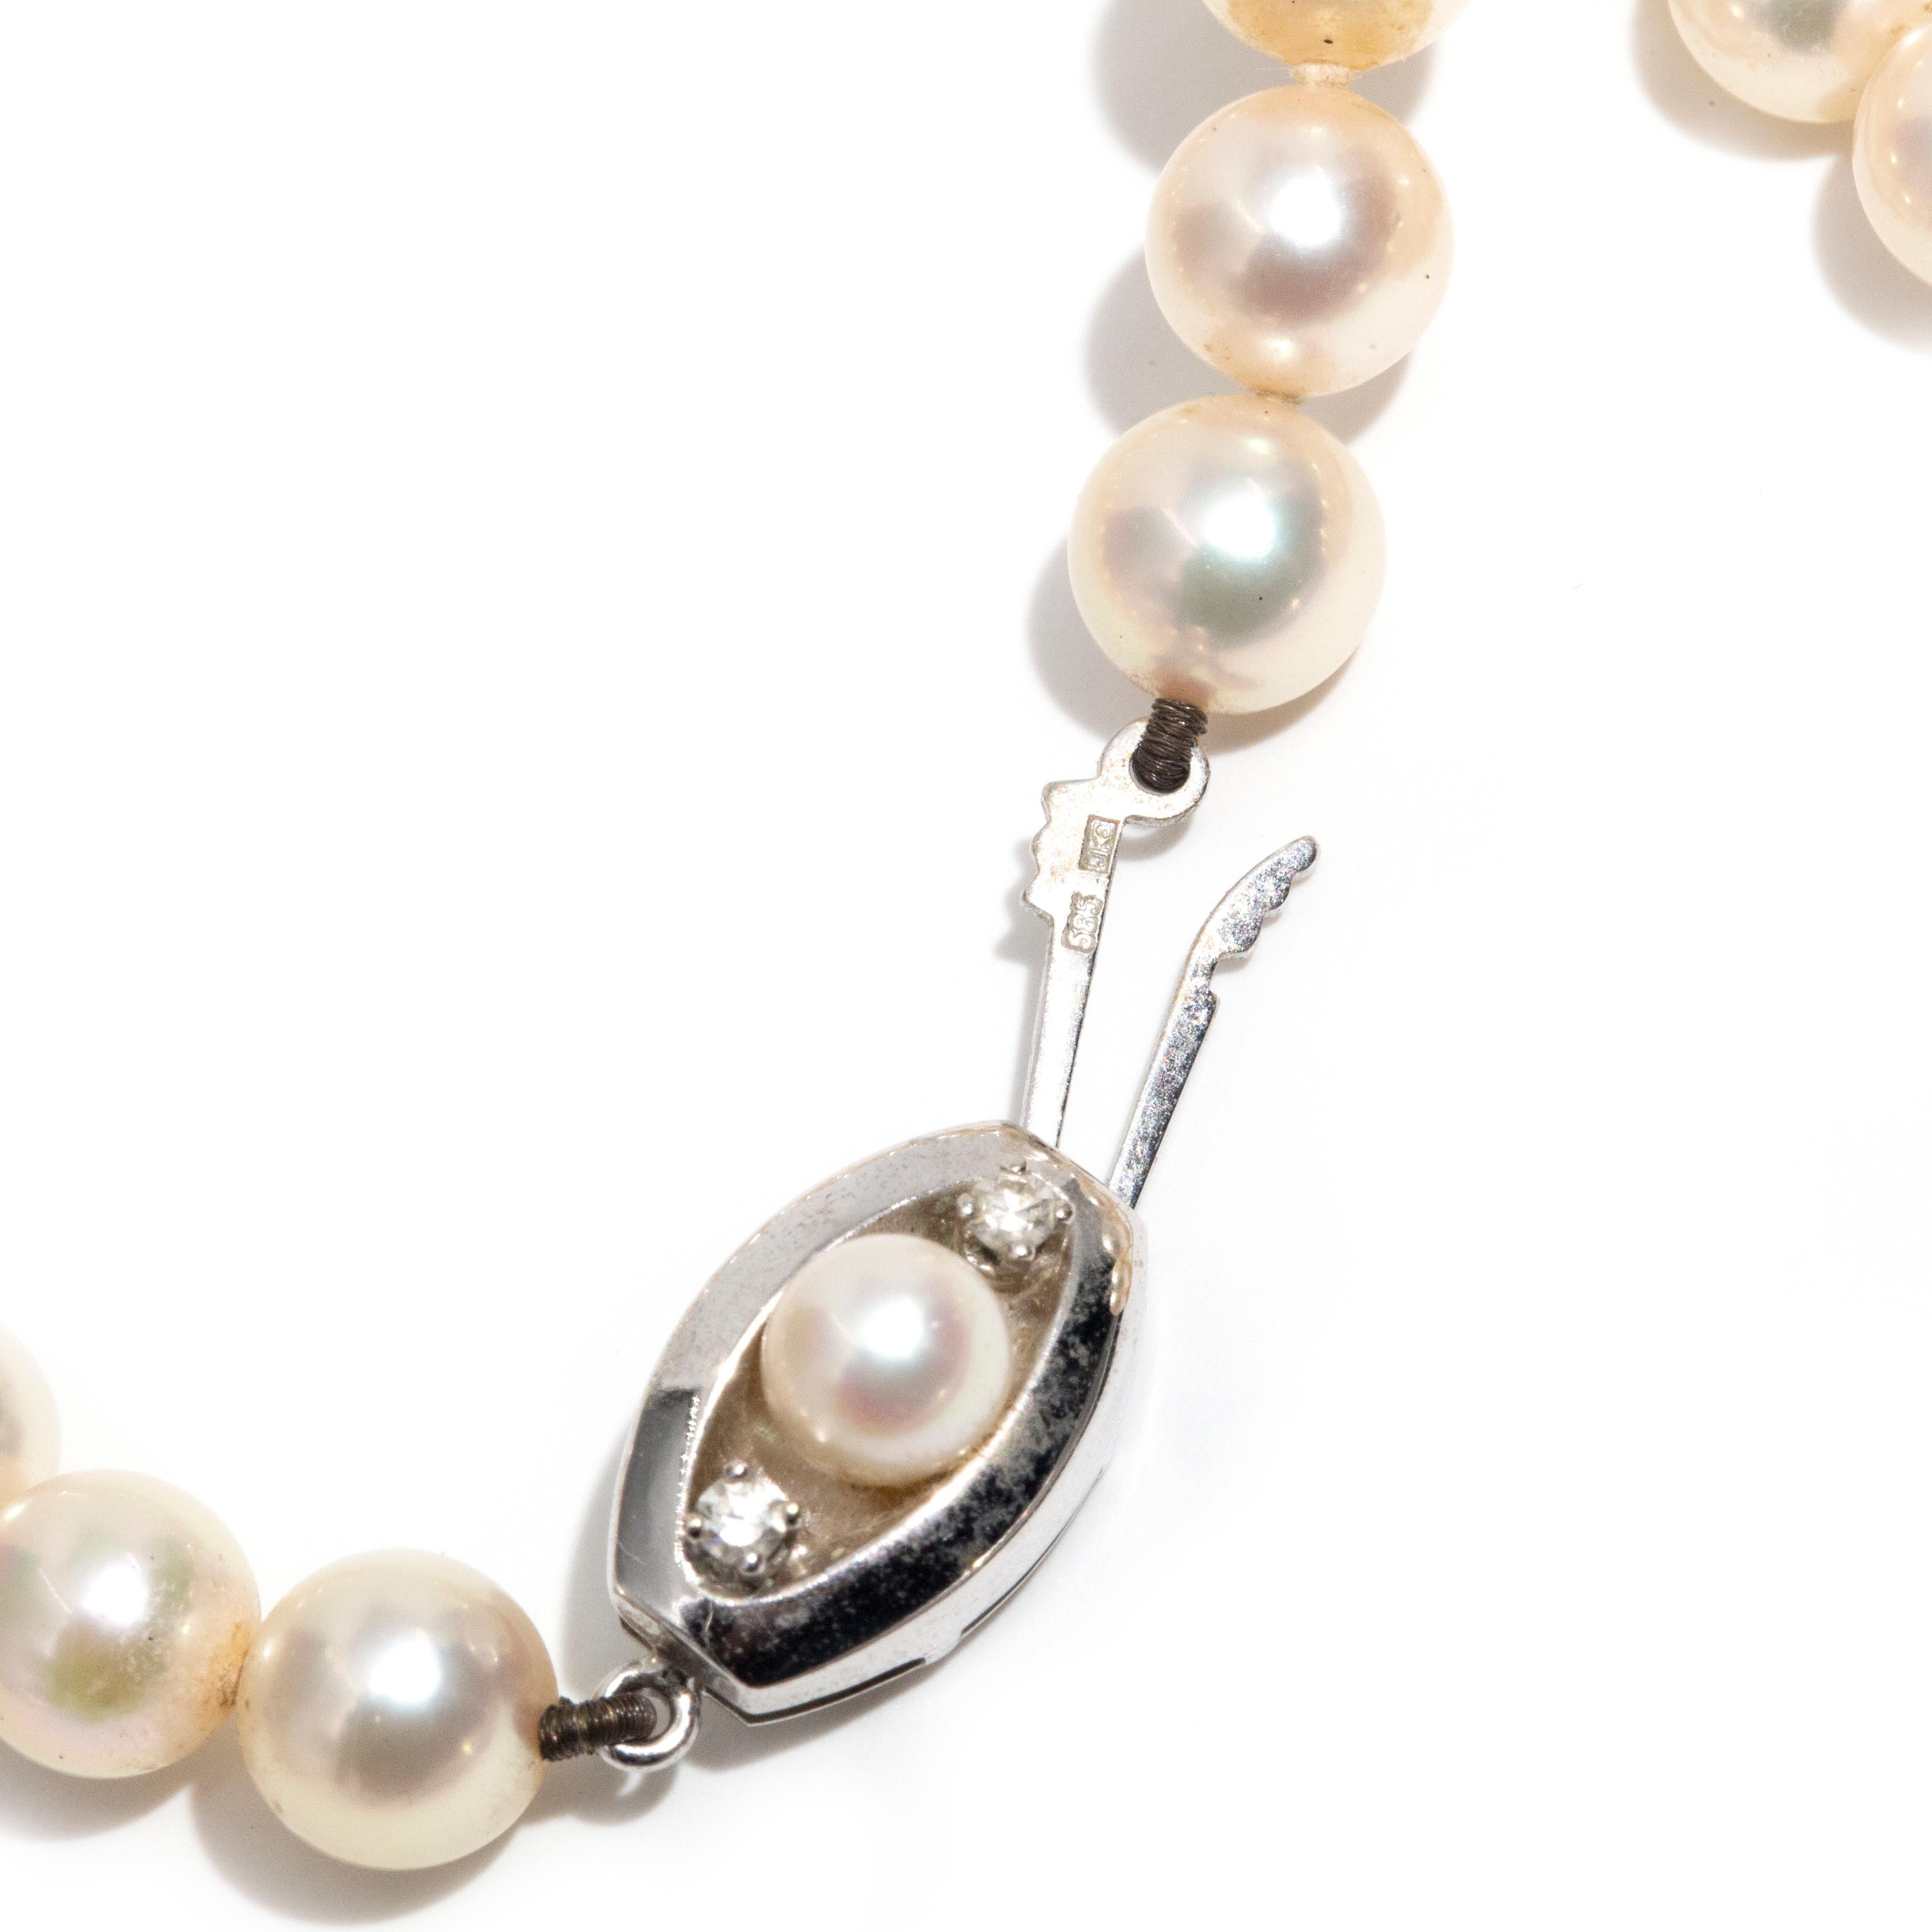 Women's Vintage 1990s Cultured High Lustre Cream Colour Akoya Pearl Strand Necklace